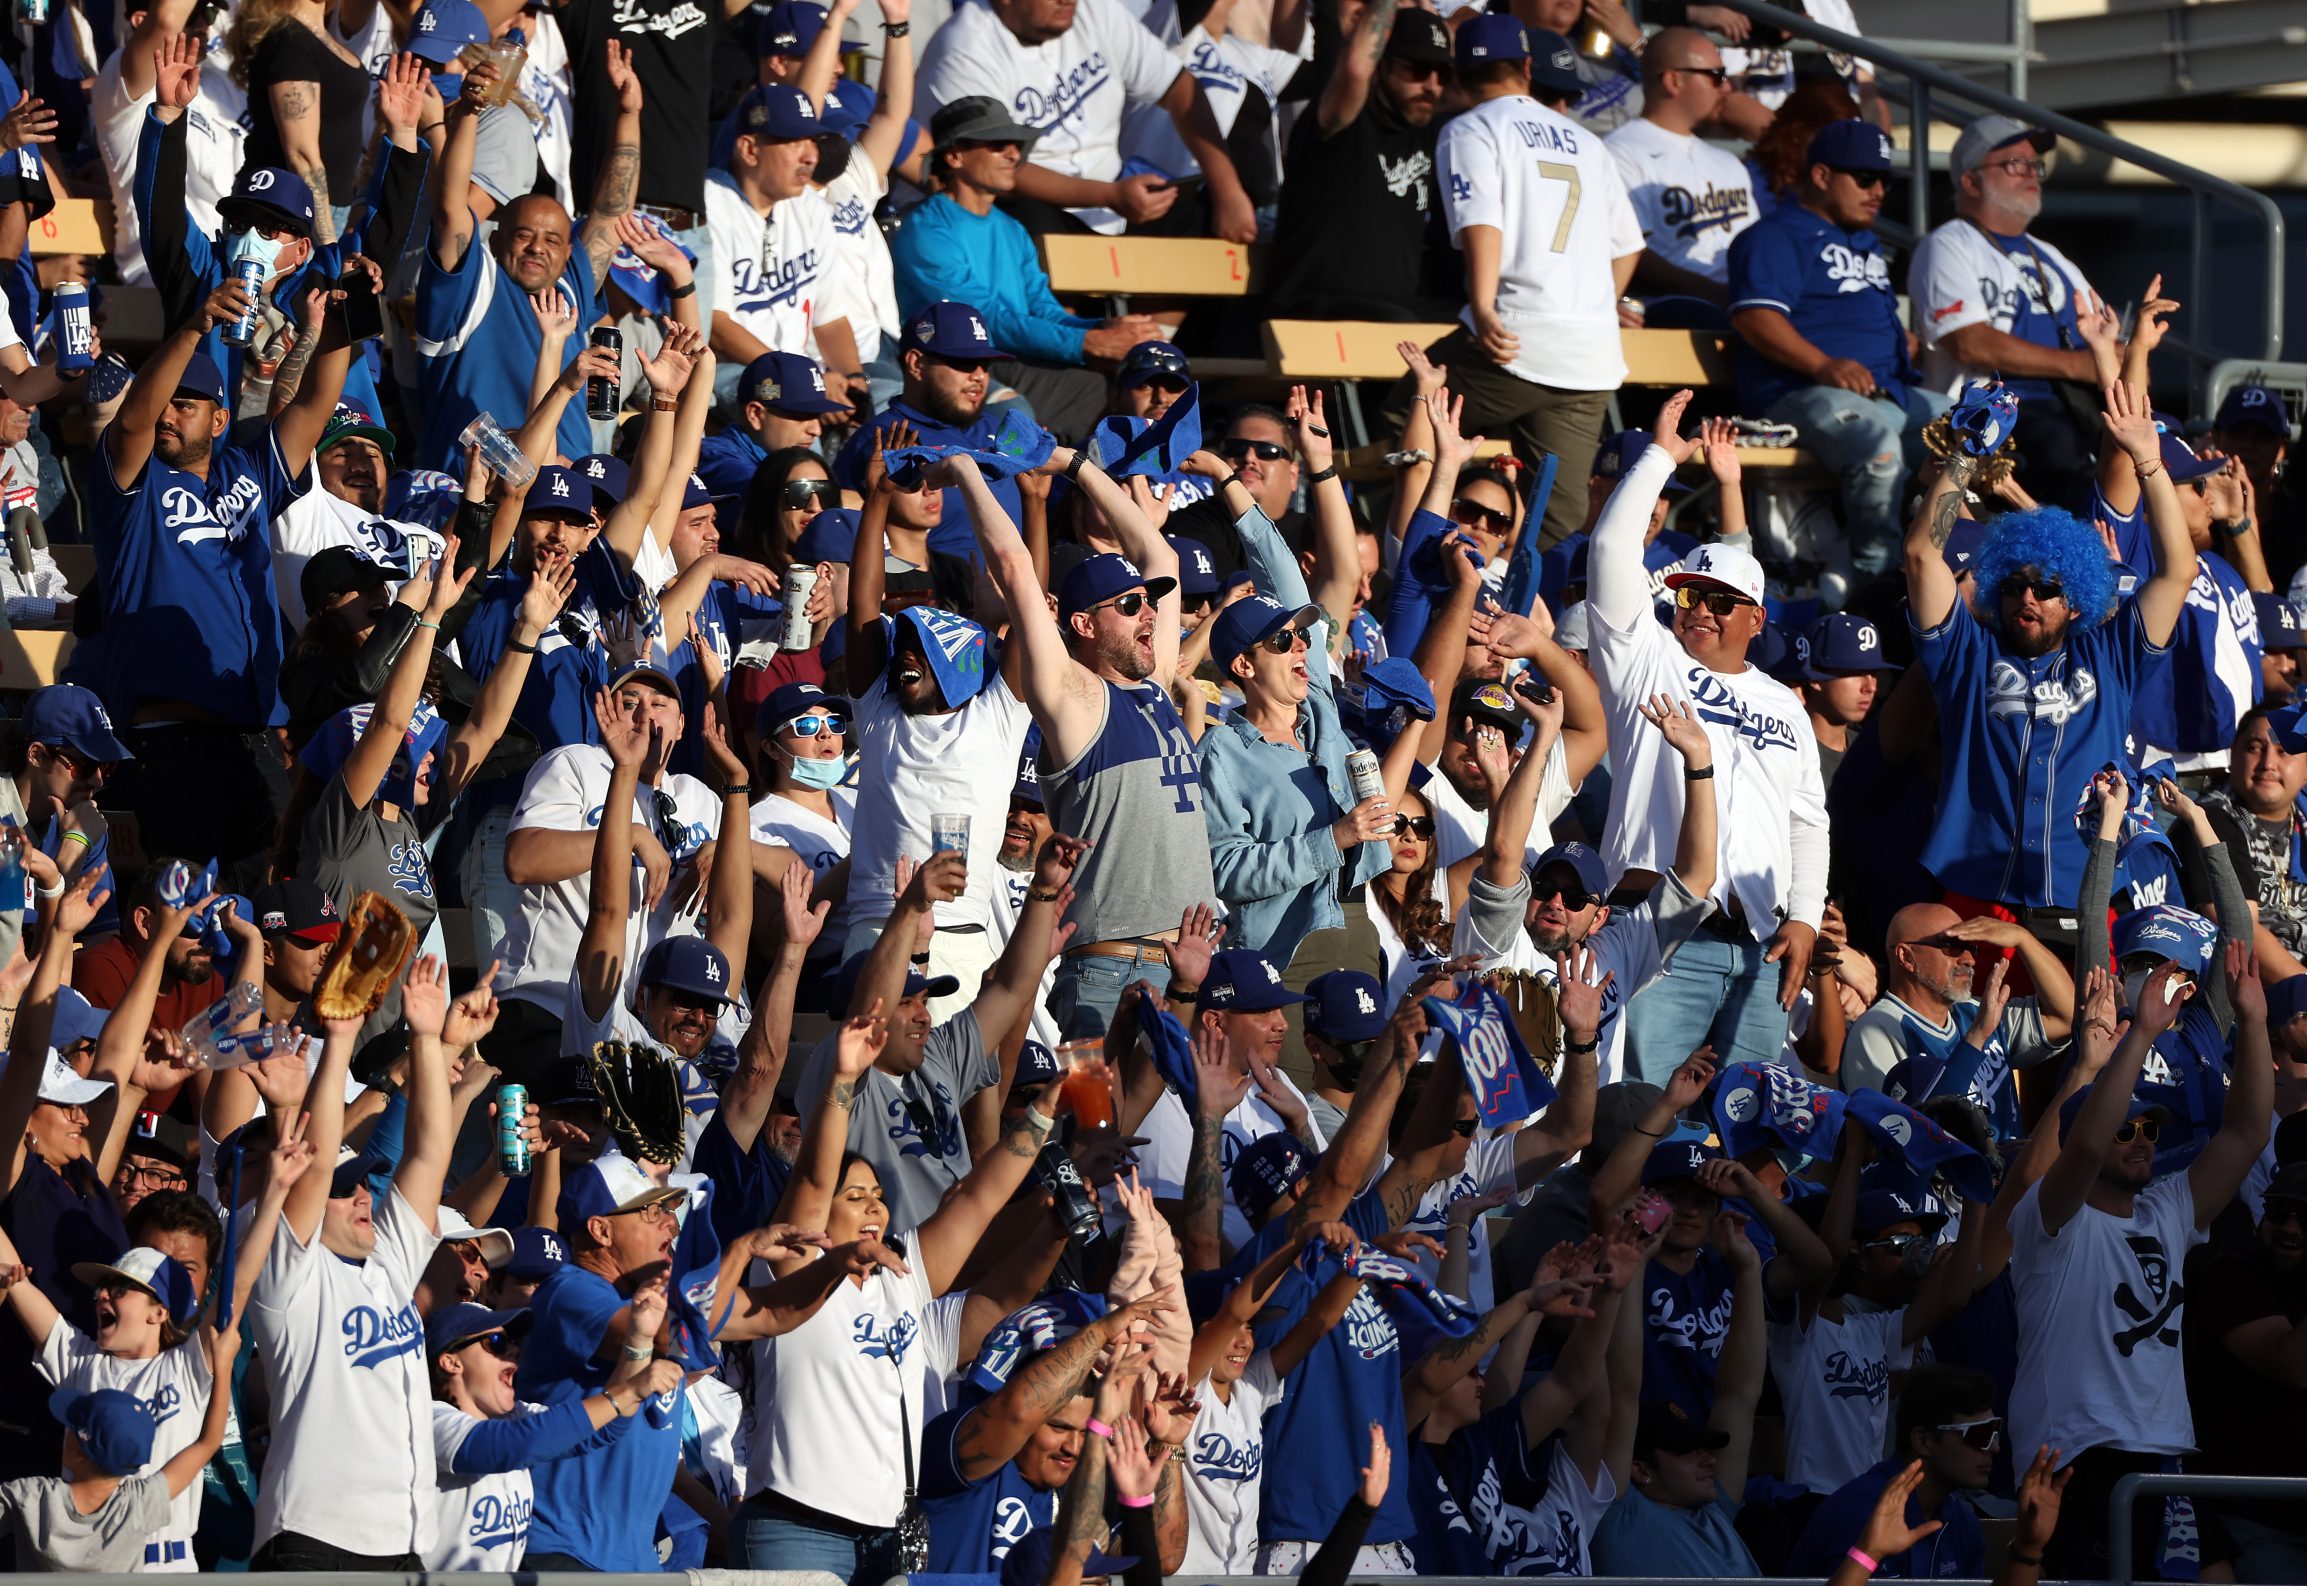 LOS ANGELES, CALIFORNIA - OCTOBER 19: Los Angeles Dodgers fans cheer during Game 3 of the National League Championship Series against the Atlanta Braves at Dodger Stadium on October 19, 2021 in Los Angeles, California.